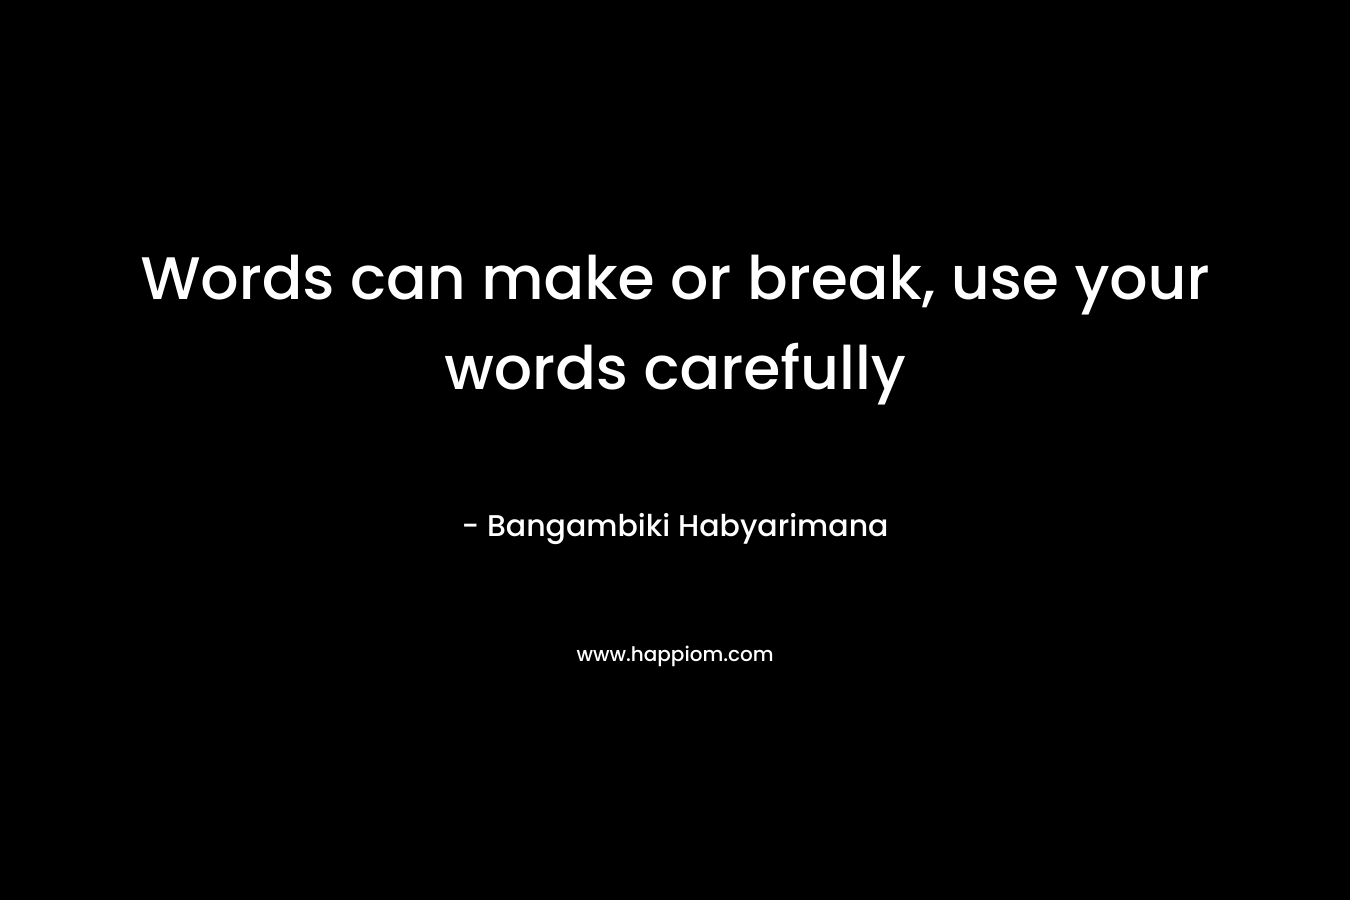 Words can make or break, use your words carefully